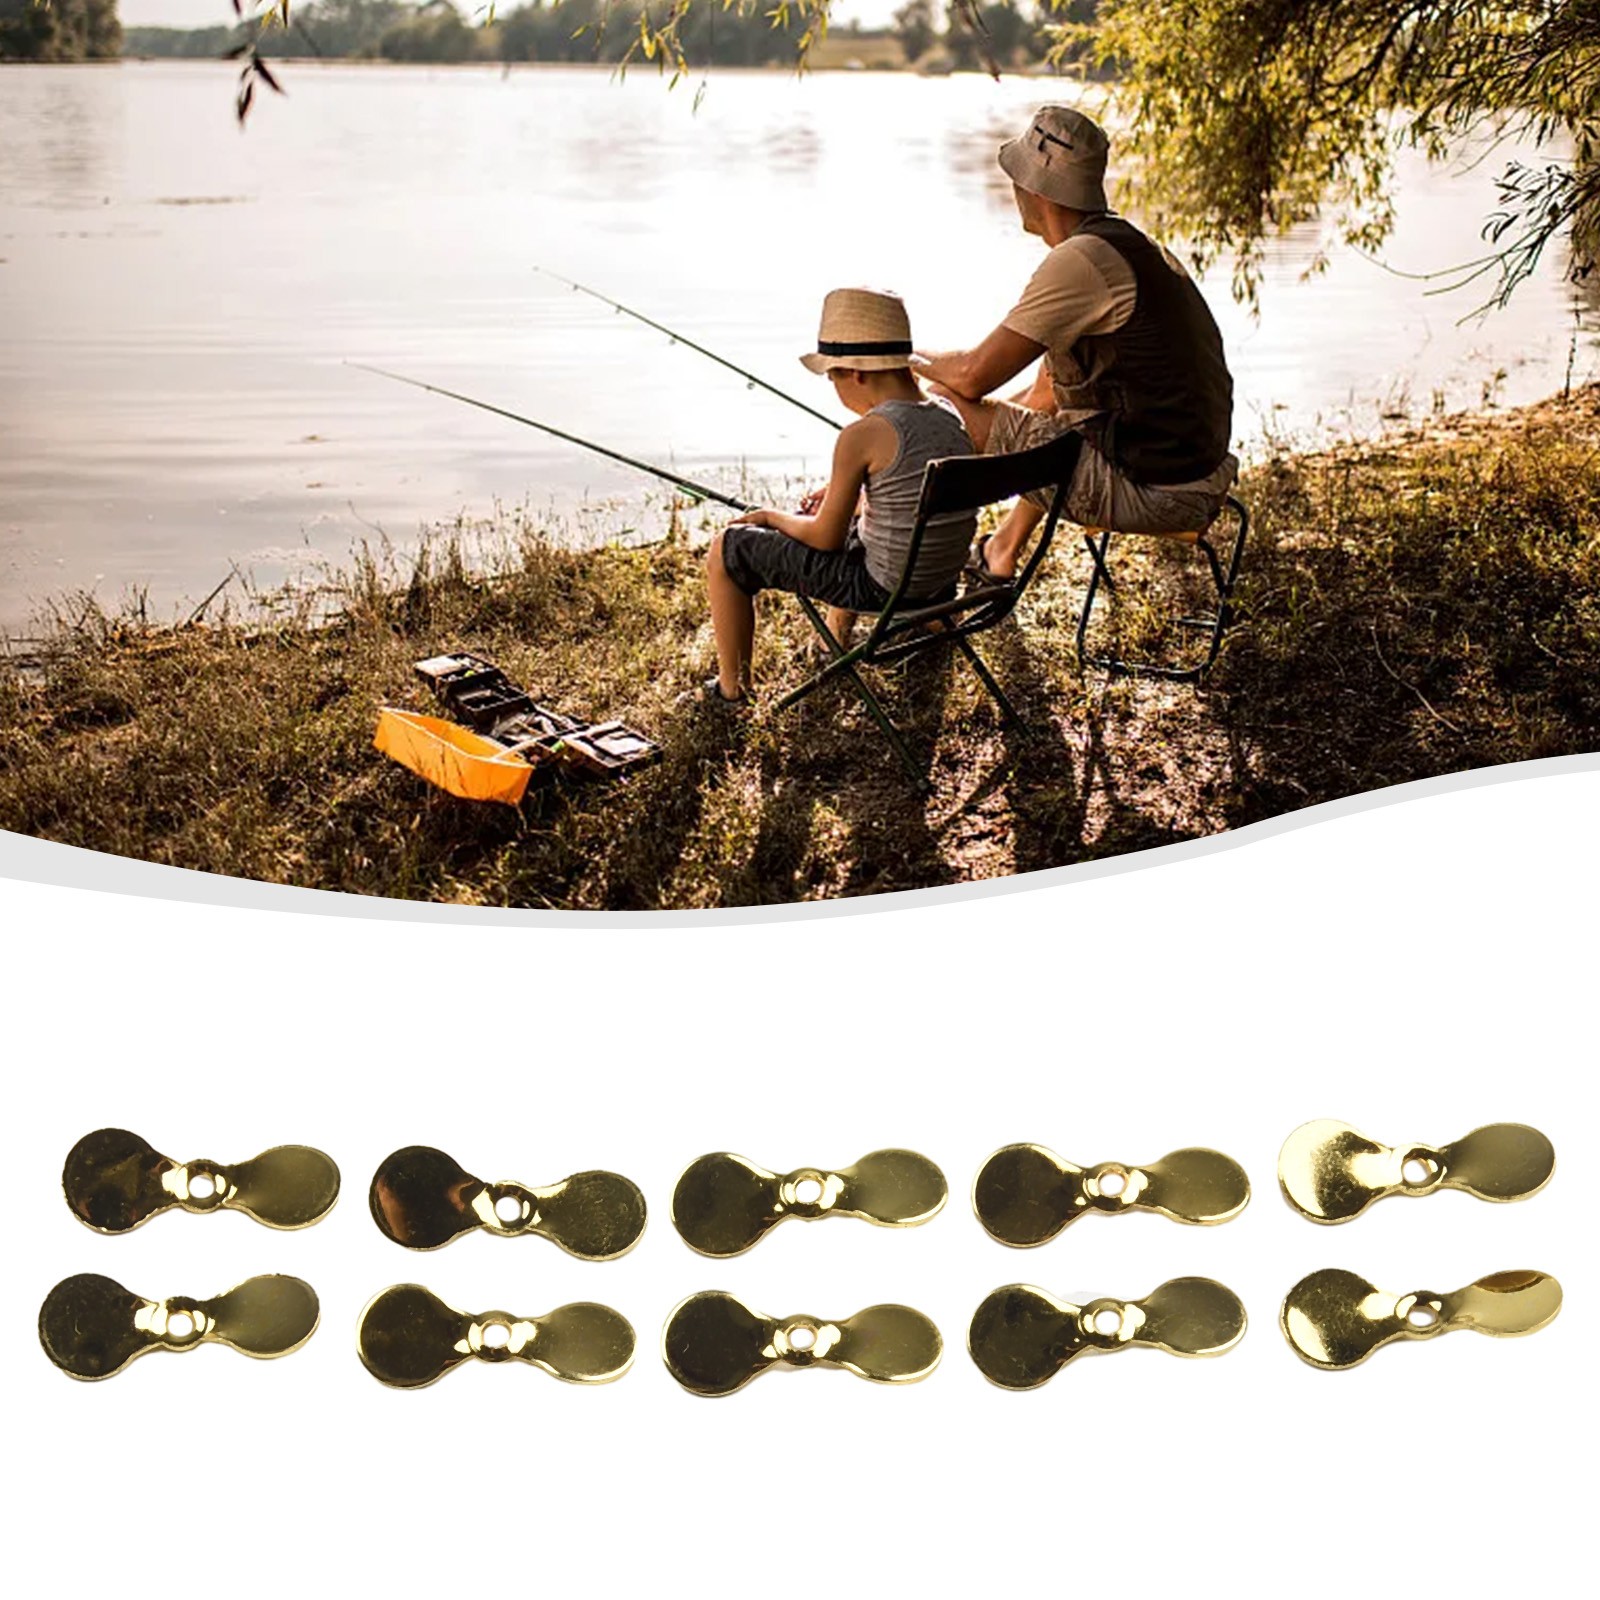 Reflective Propeller Blades to Attract Green and White Stripe Fish